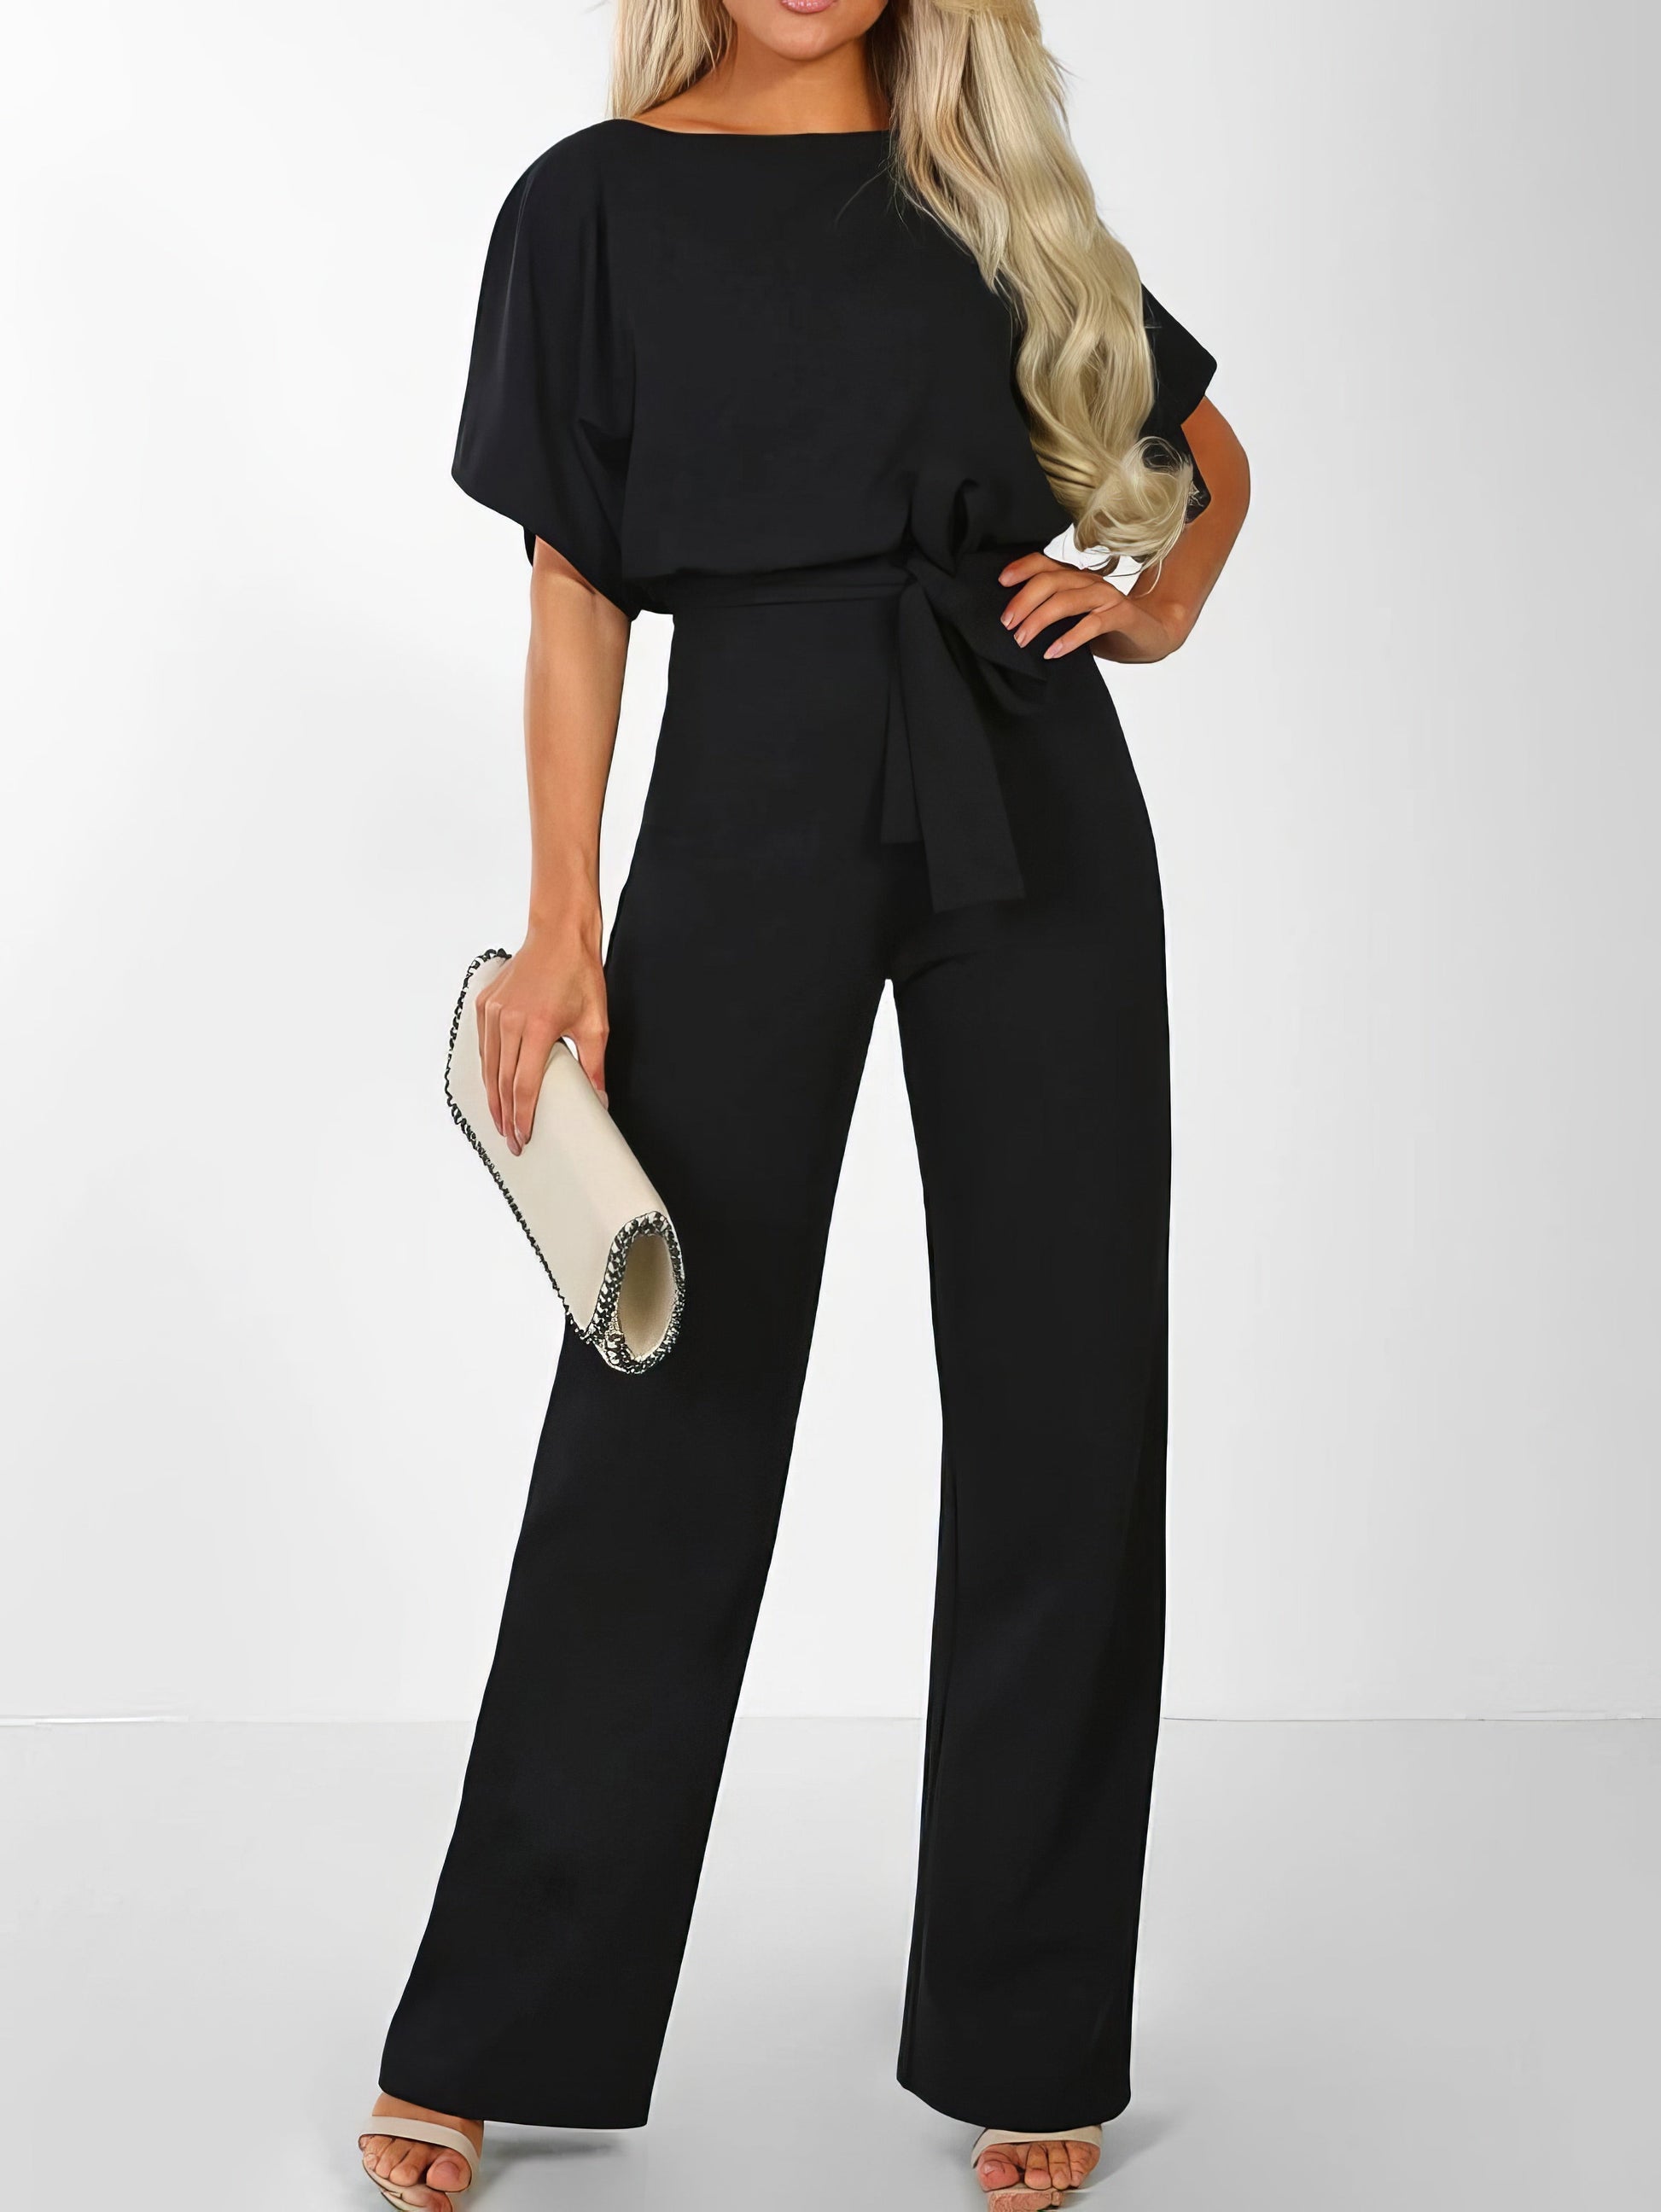 Jumpsuits - Solid Lace-up Short-sleeved Women's Jumpsuit - MsDressly